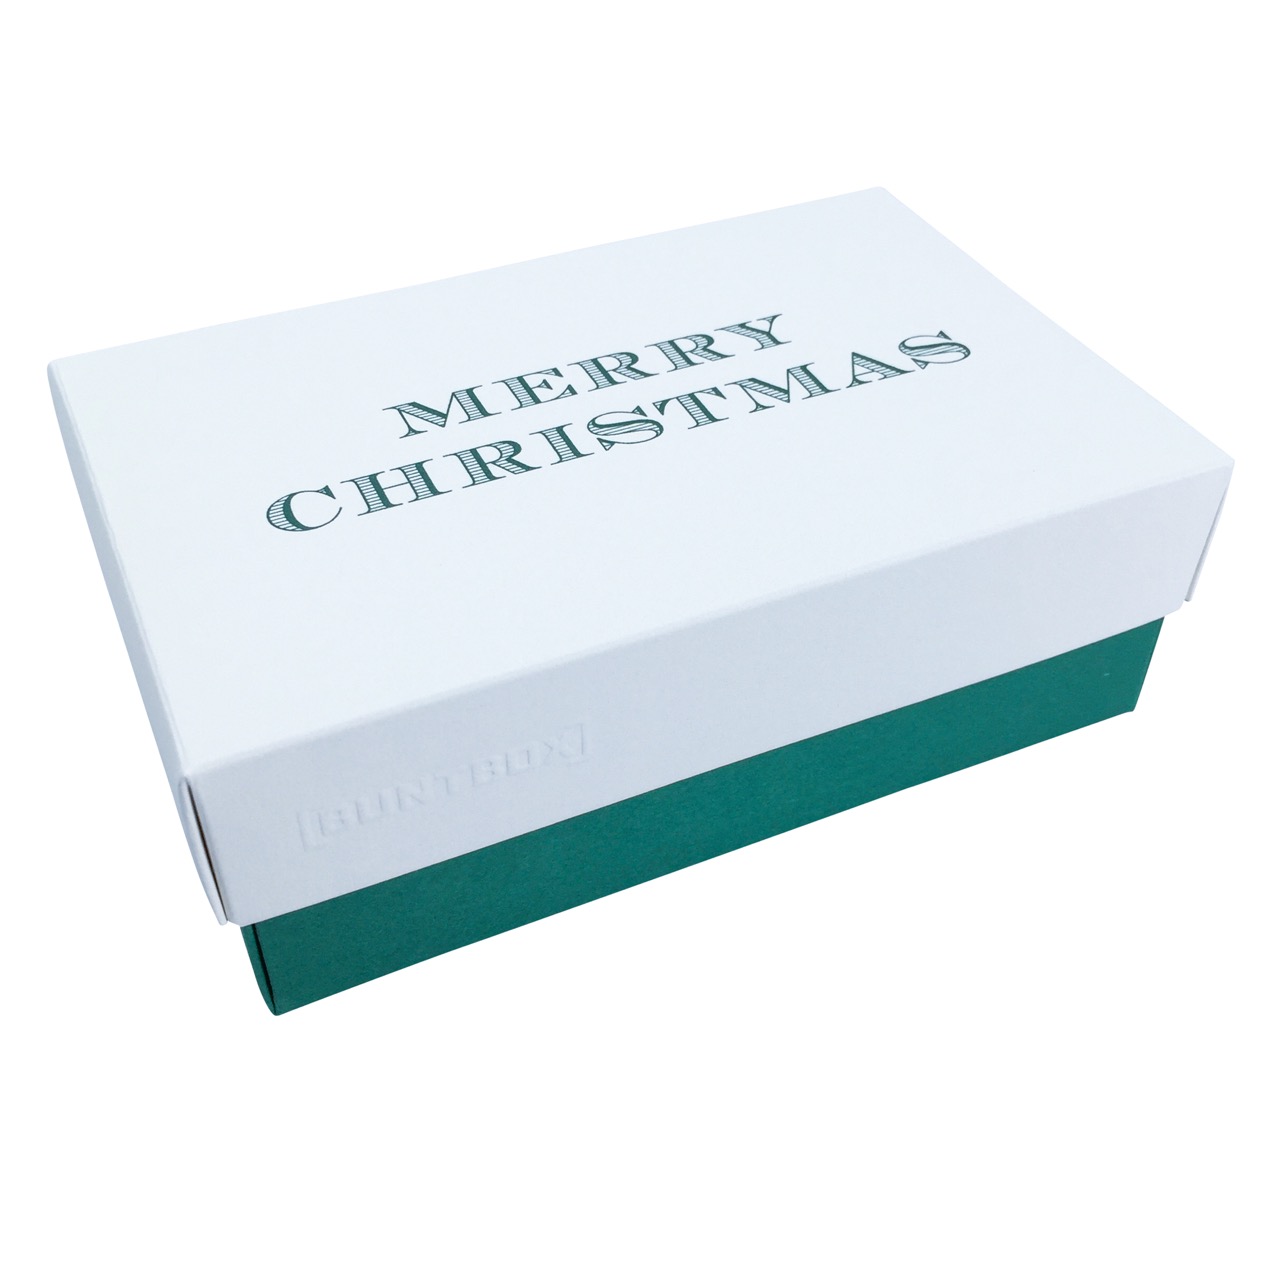 Buntbox S Fine Paper Christmas in Champagner-Emerald